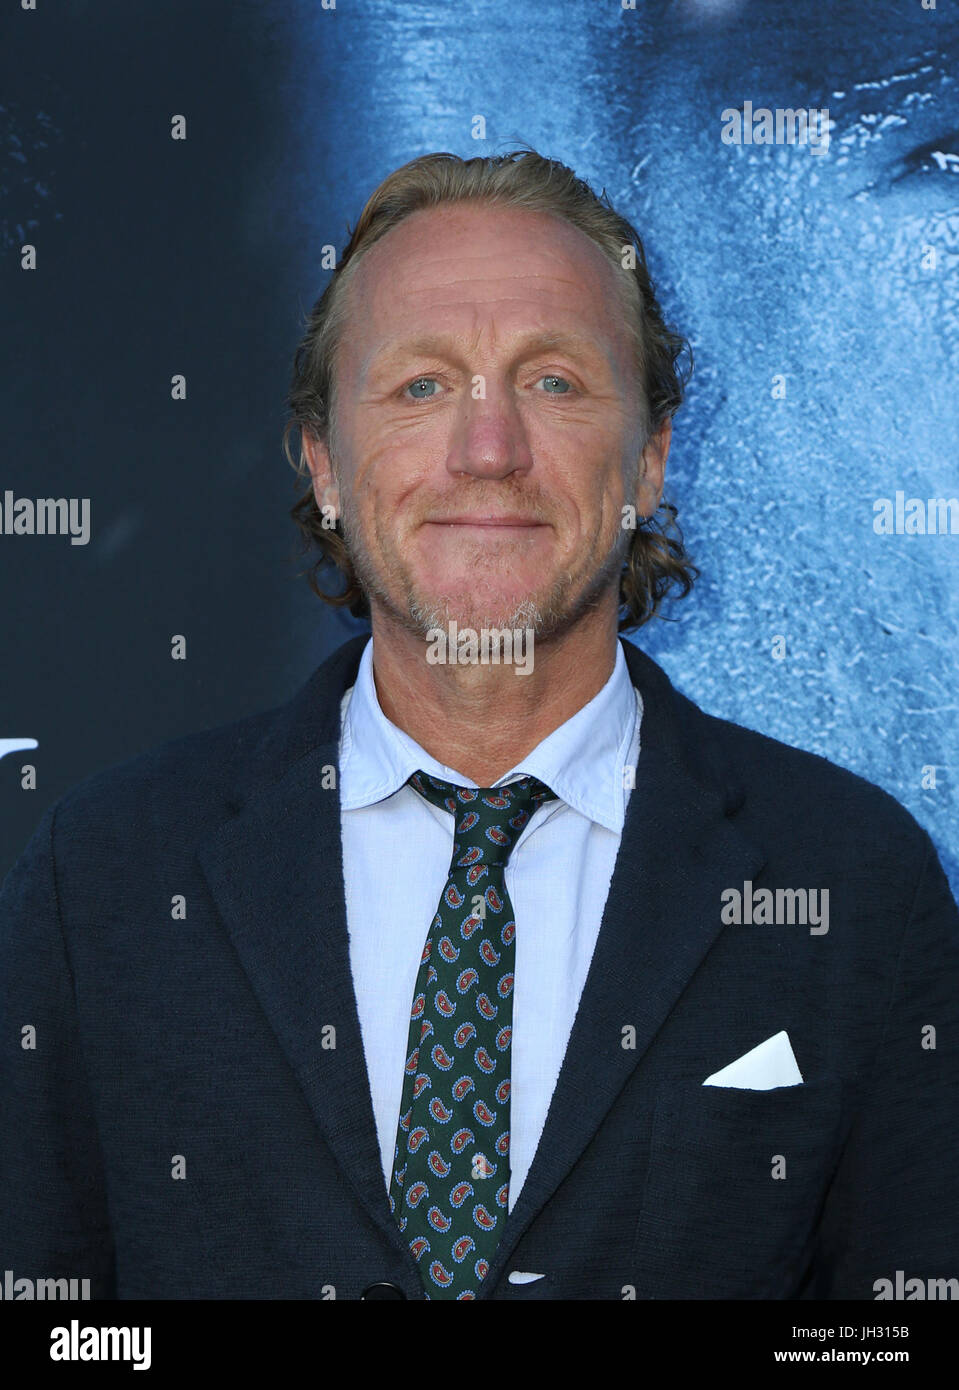 Los Angeles, USA. 12th Jul, 2017. Jerome Flynn, at premiere ofHBO's 'Game Of Thrones' Season 7 at The Walt Disney Concert Hall, California on July 12, 2017. Credit: MediaPunch Inc/Alamy Live News Stock Photo